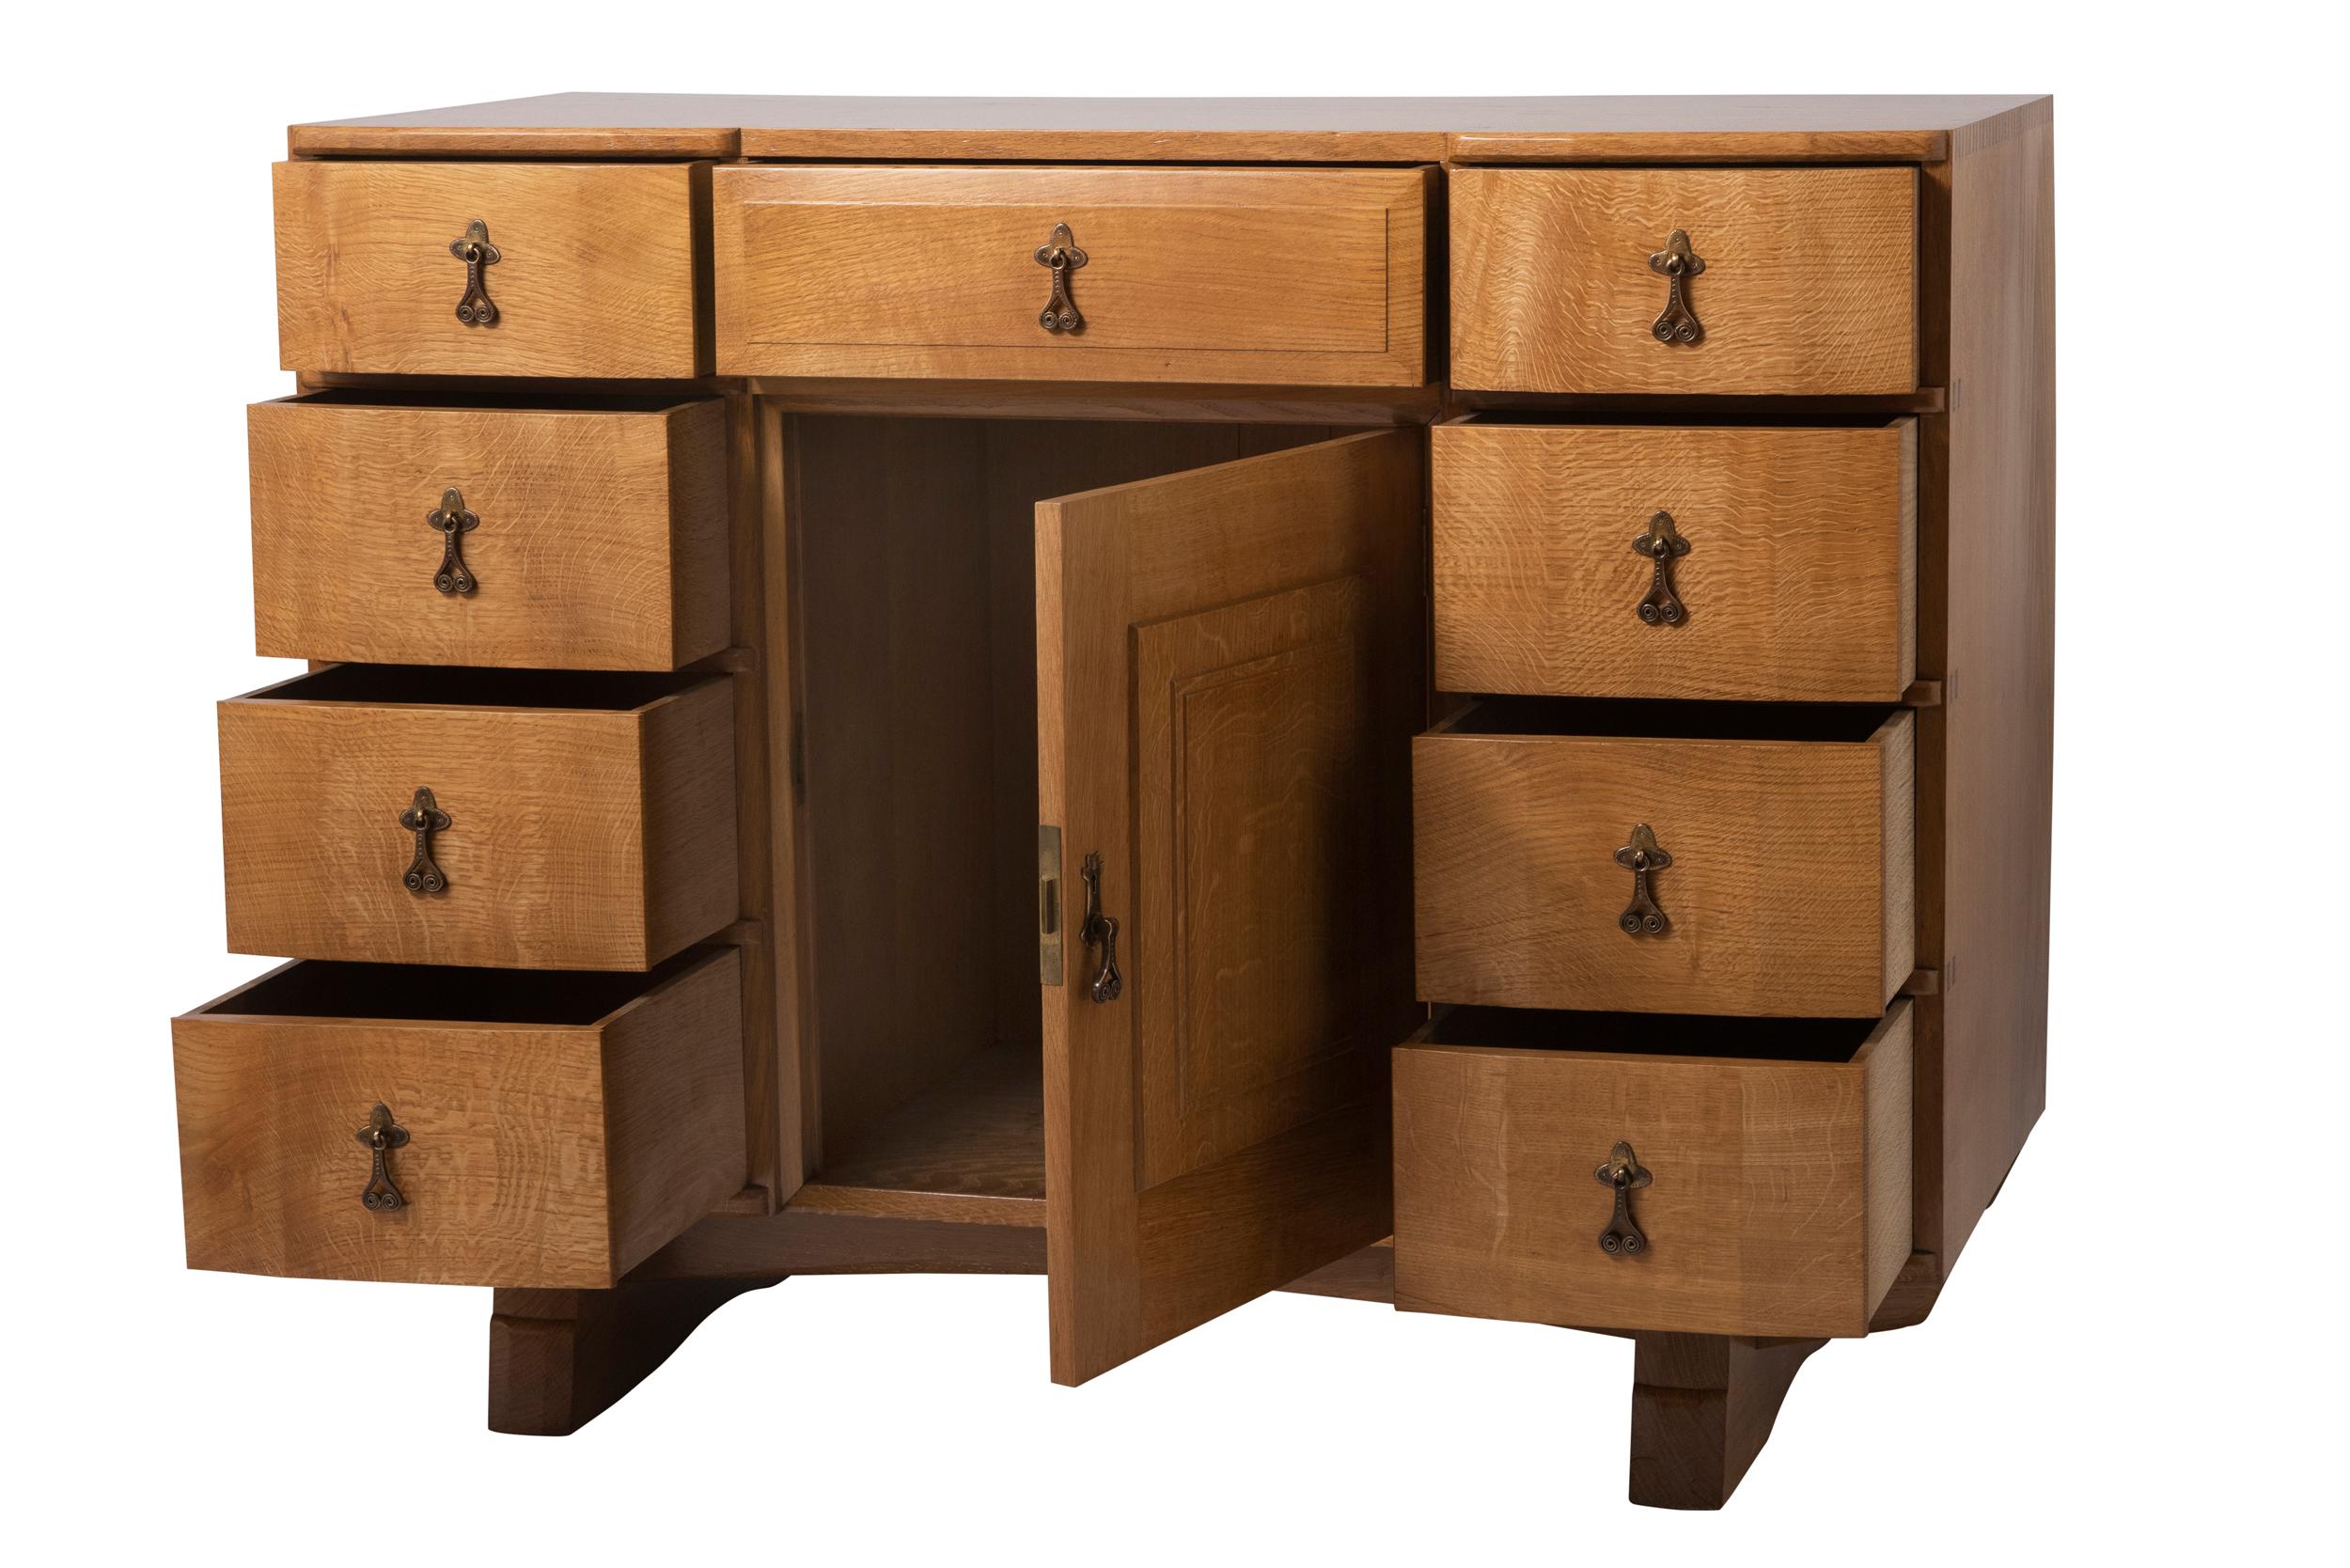 An oak cabinet by Peter Waals (1870-1937)
The shaped top centred with a projecting chamfered drawer, 4 drawers either side of shaped convex form and panelled cupboard beneath.
With beautiful wrought iron scroll handles with chased decoration.
On